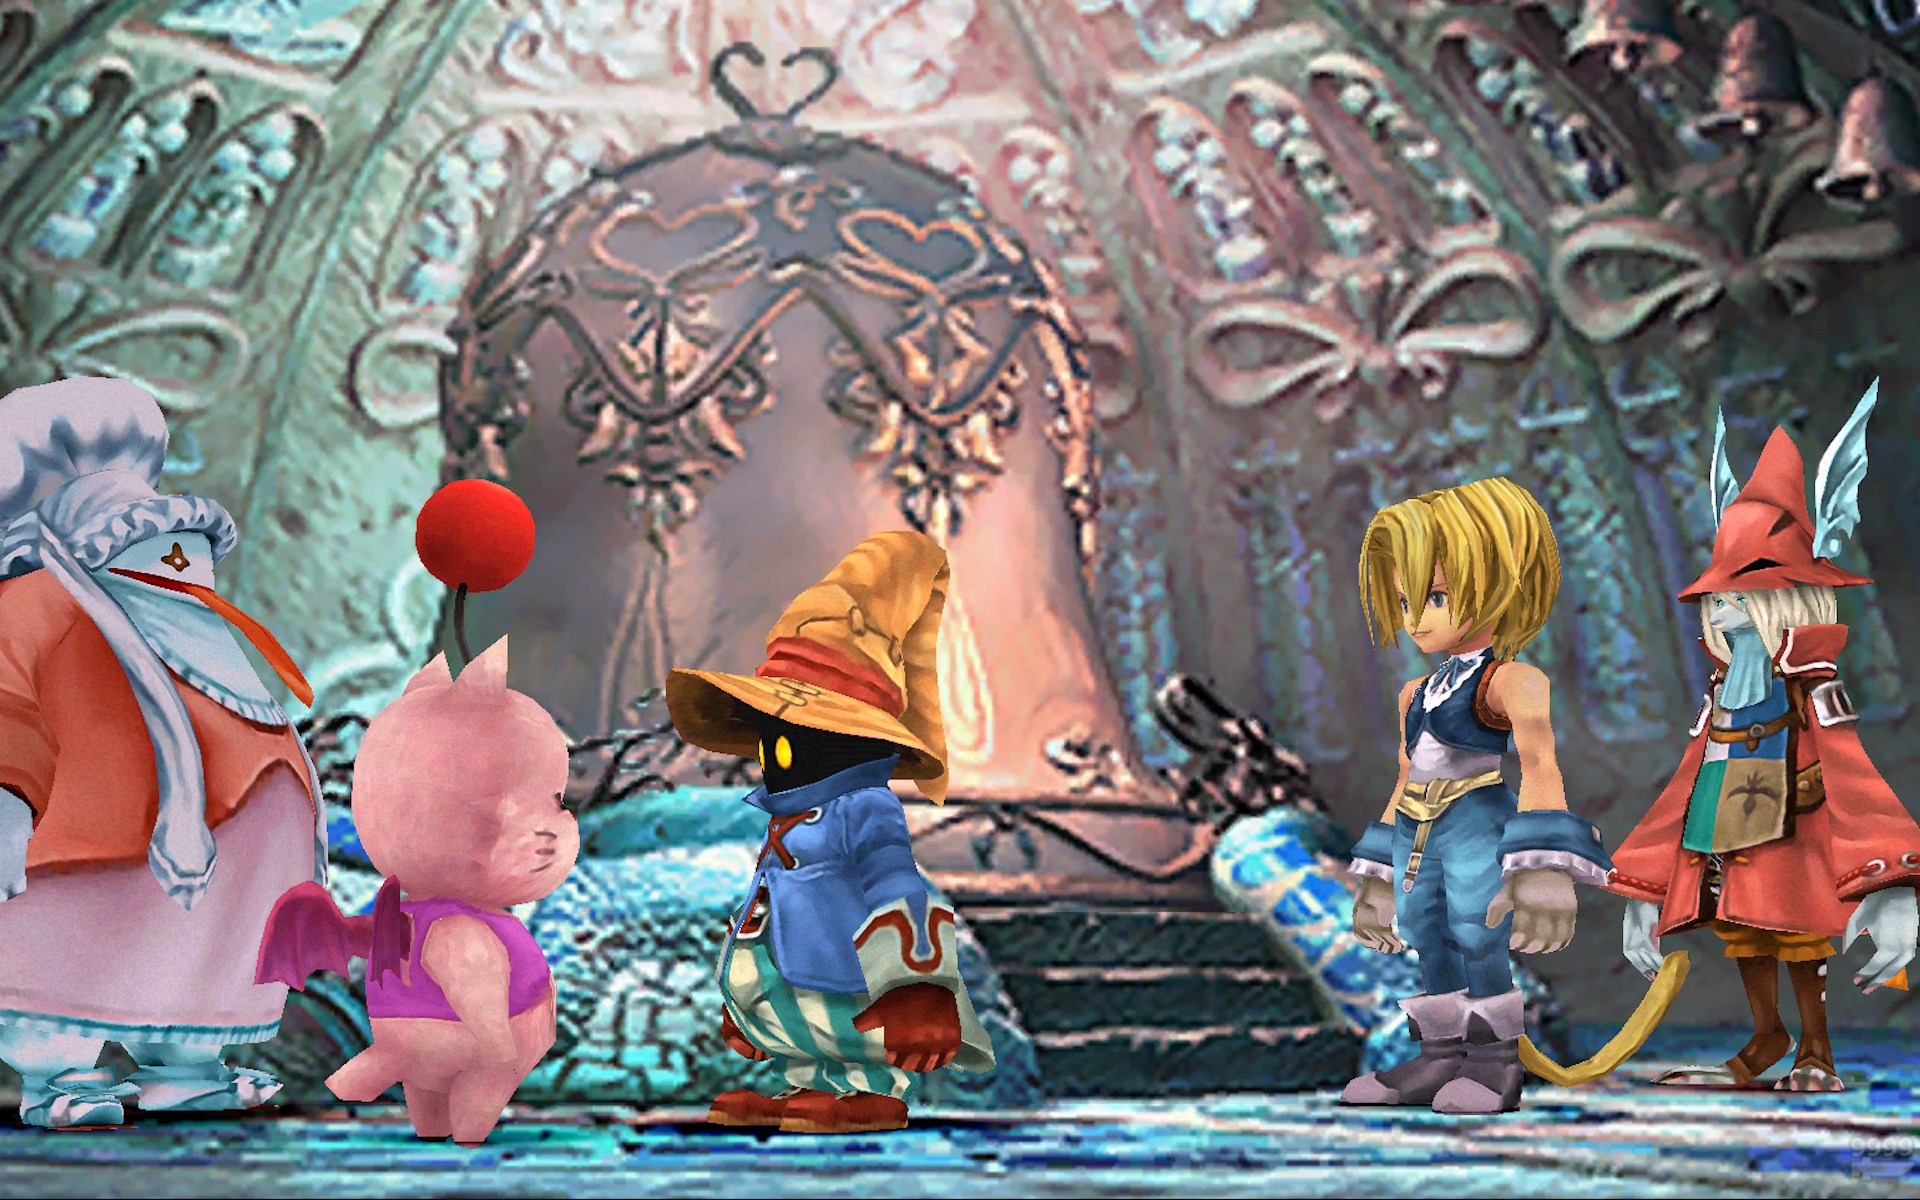 Final Fantasy 9 is being adapted into a kids animated series